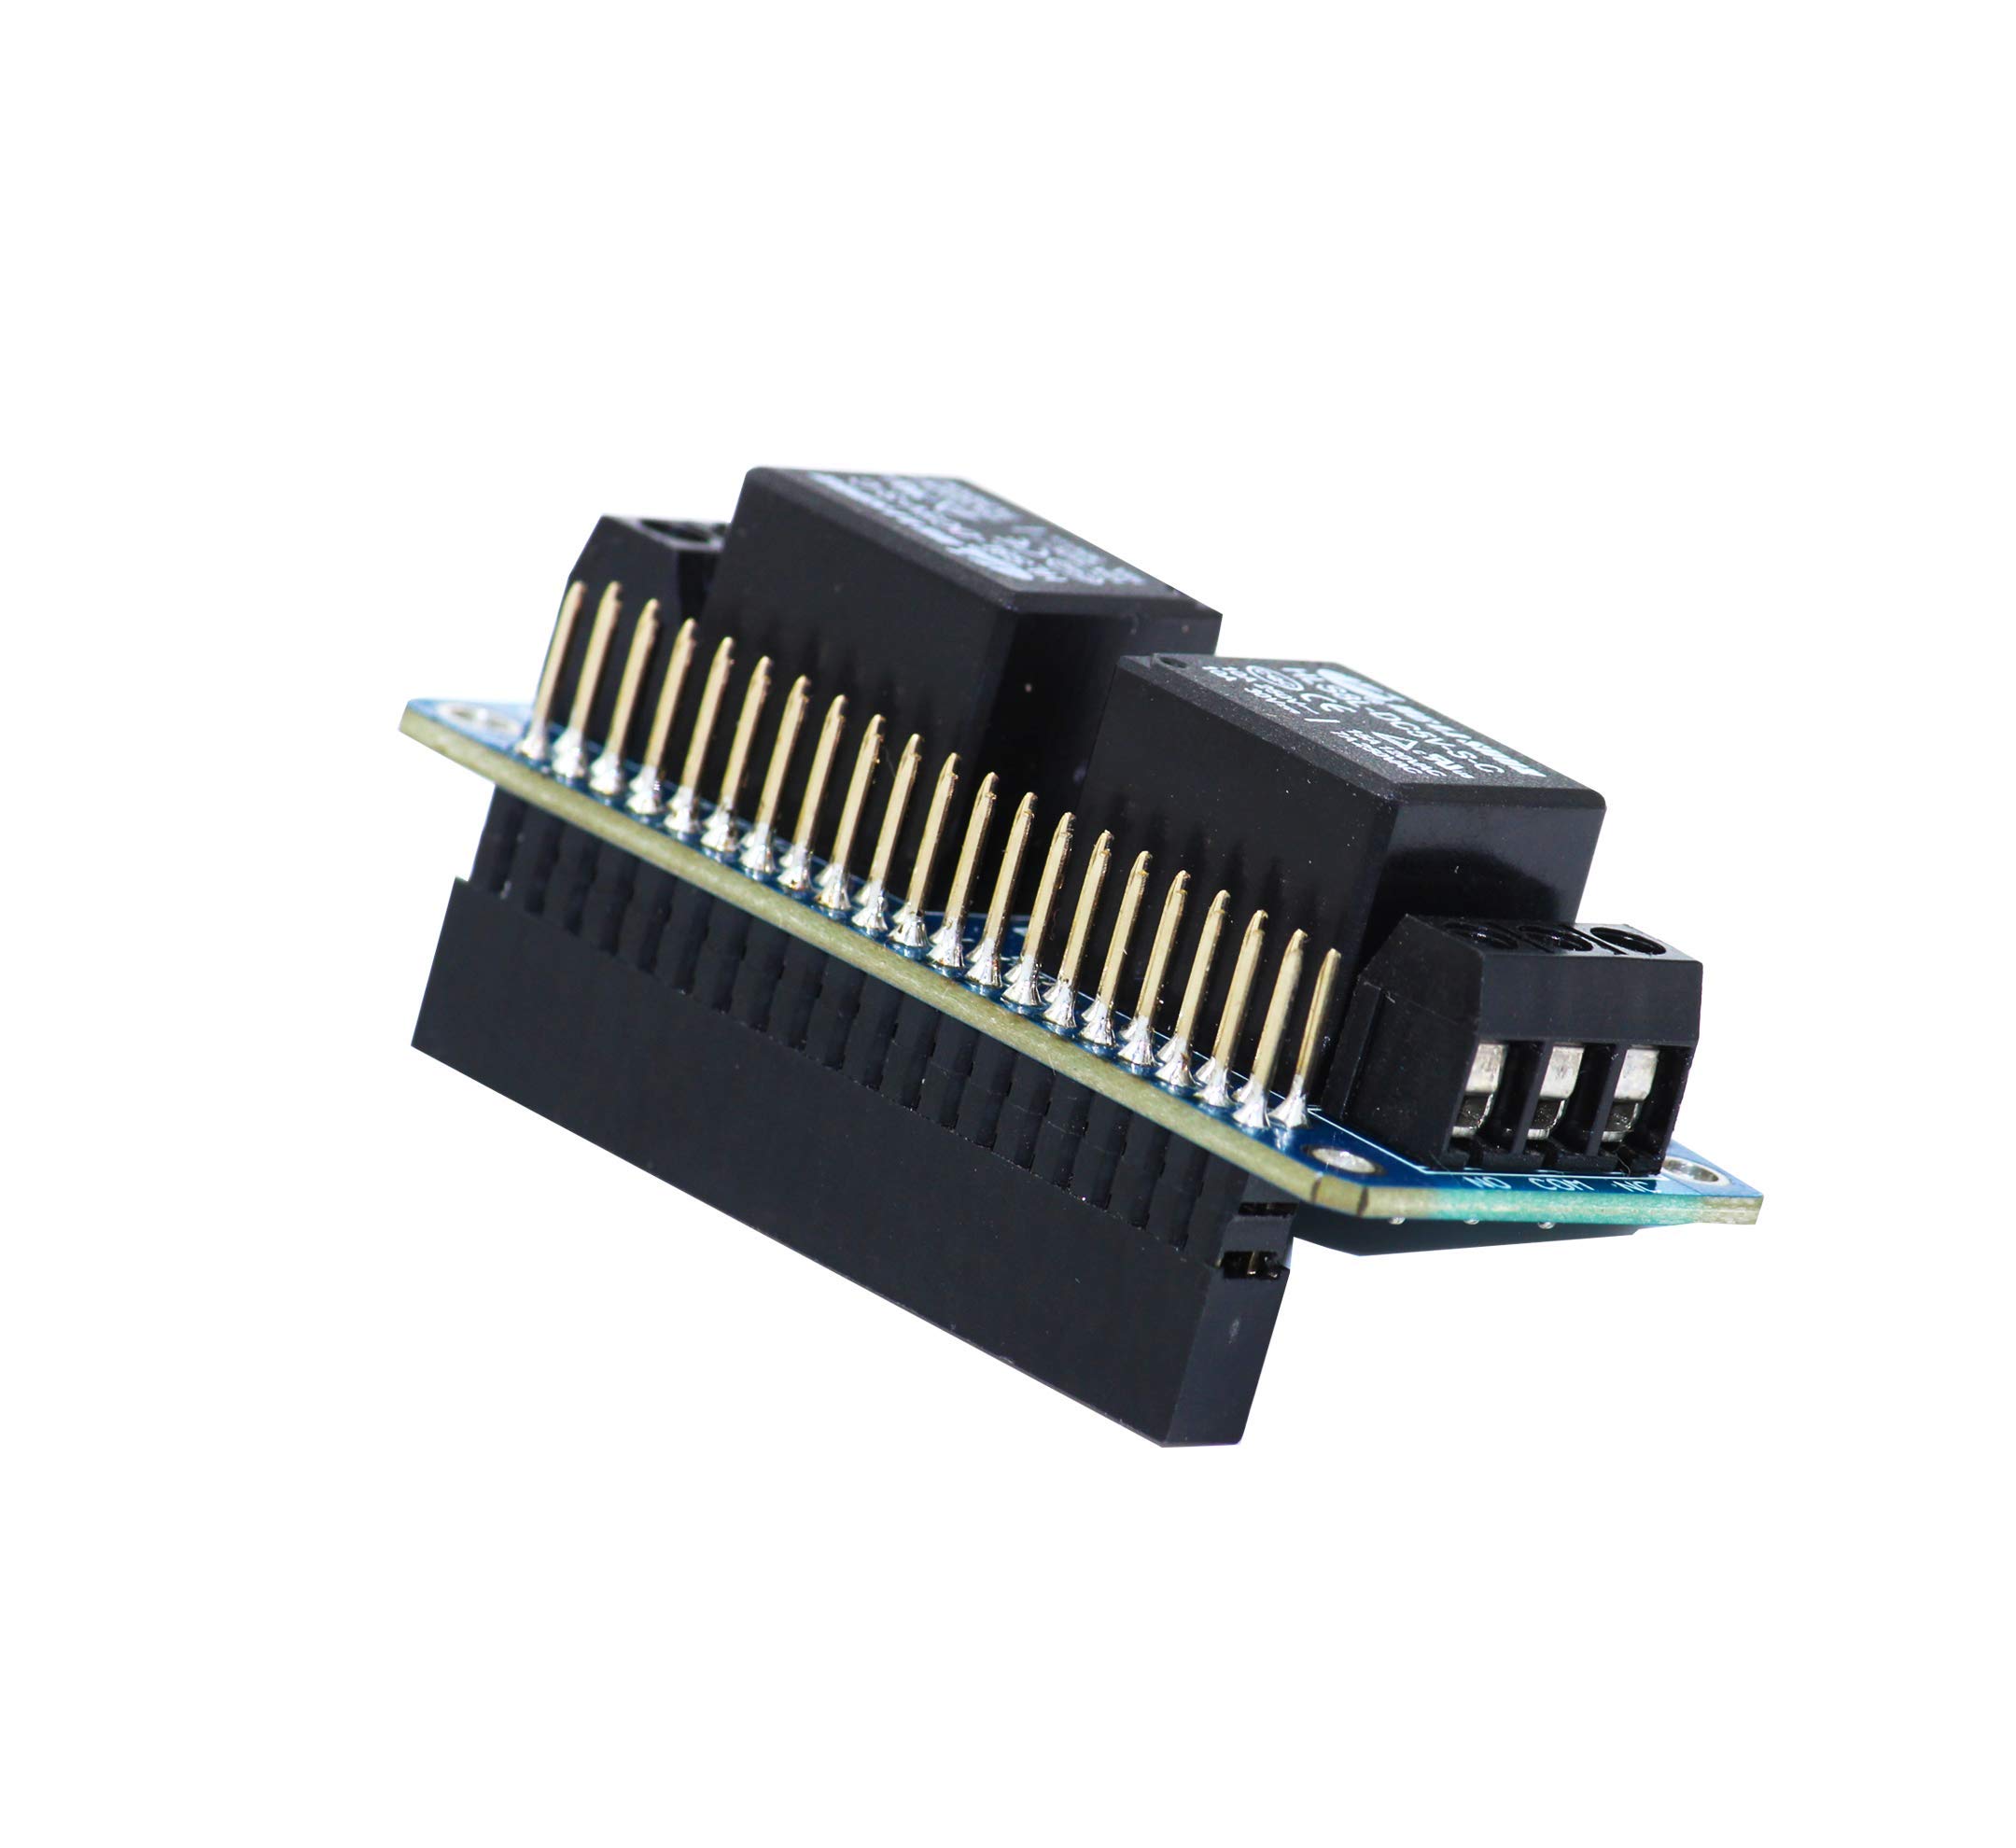 sb components Zero Relay 2 Channel 5V Relay Shield for Raspberry Pi, Relay HAT Expansion Relay Board for Raspberry Pi 4B/3B+/3B/2B/B+/A+/Zero and Zero W | Power Relay Module for Raspberry Pi